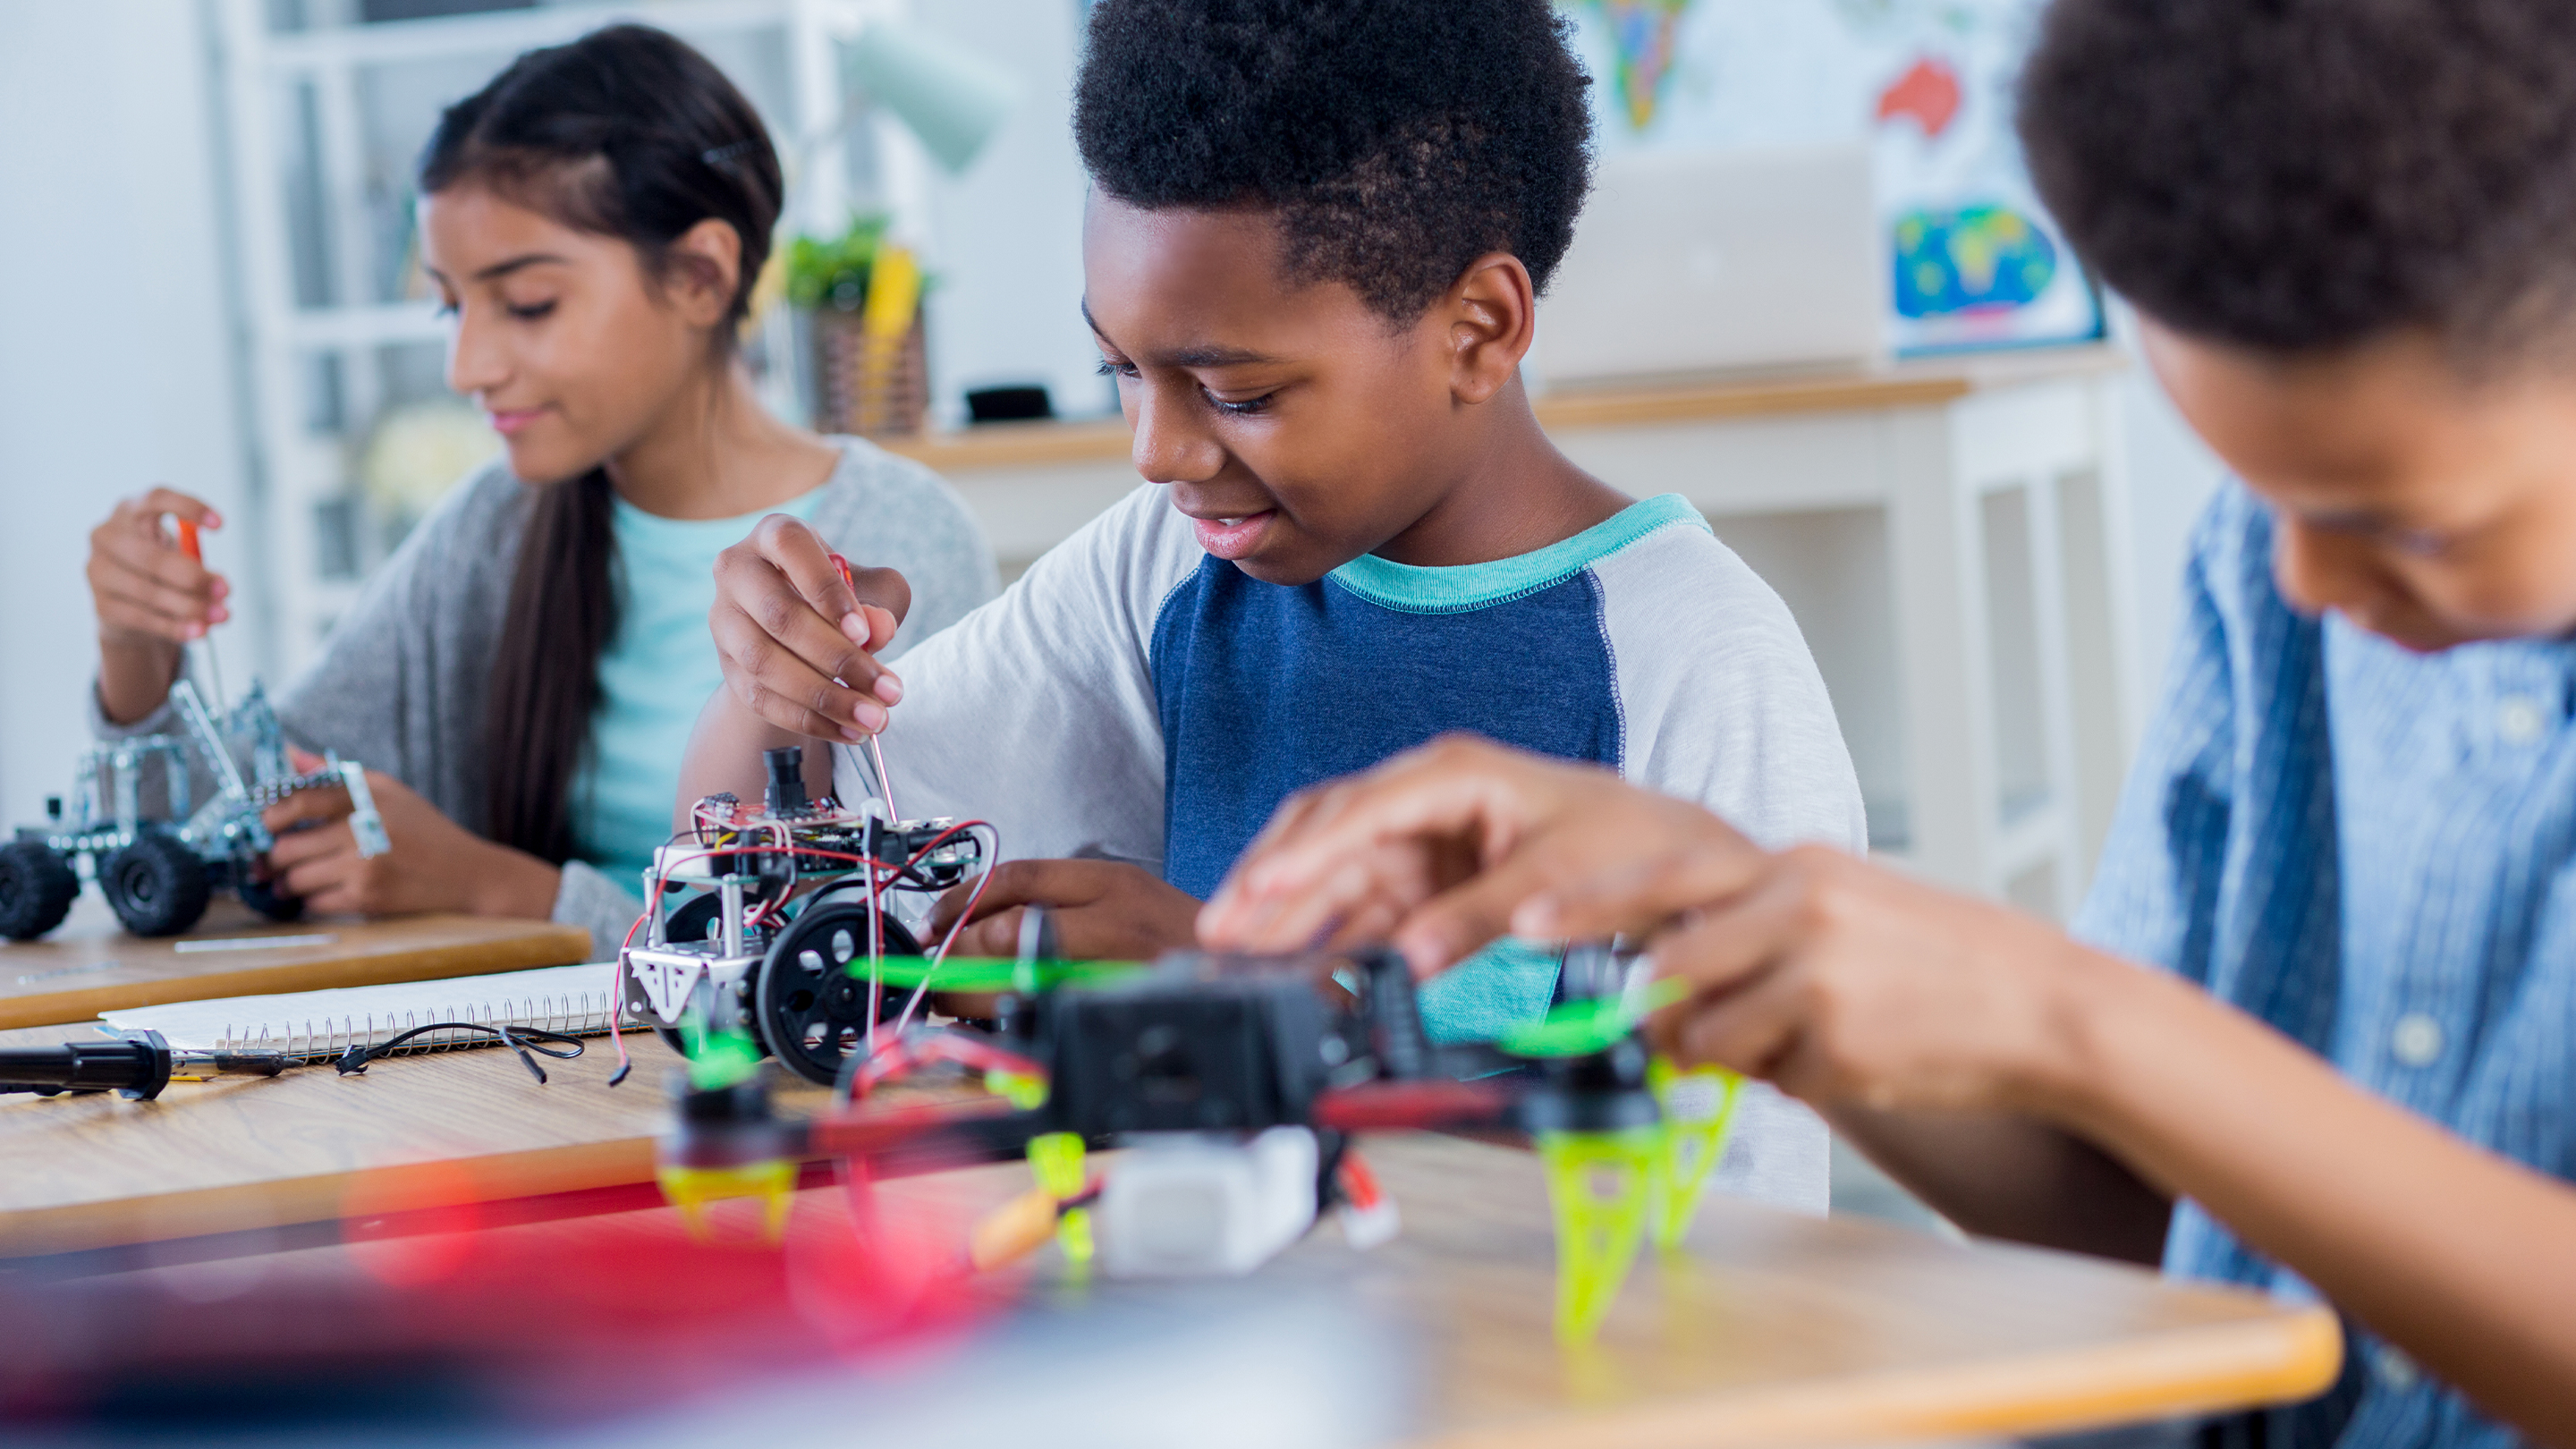 5 Reasons To Learn Robotics and Coding